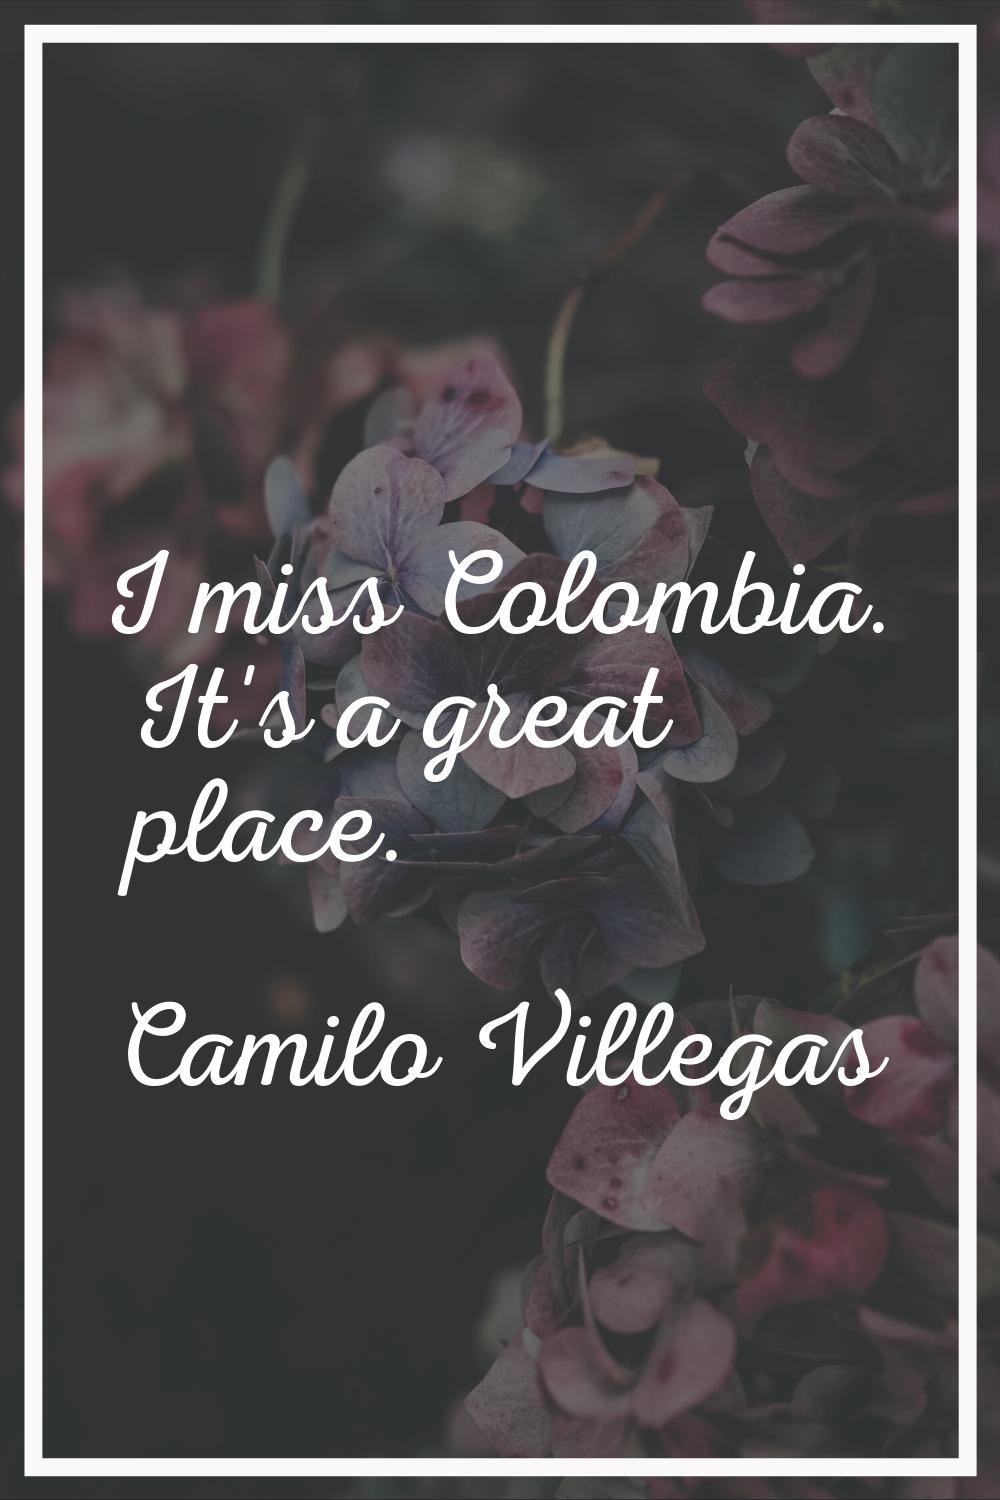 I miss Colombia. It's a great place.